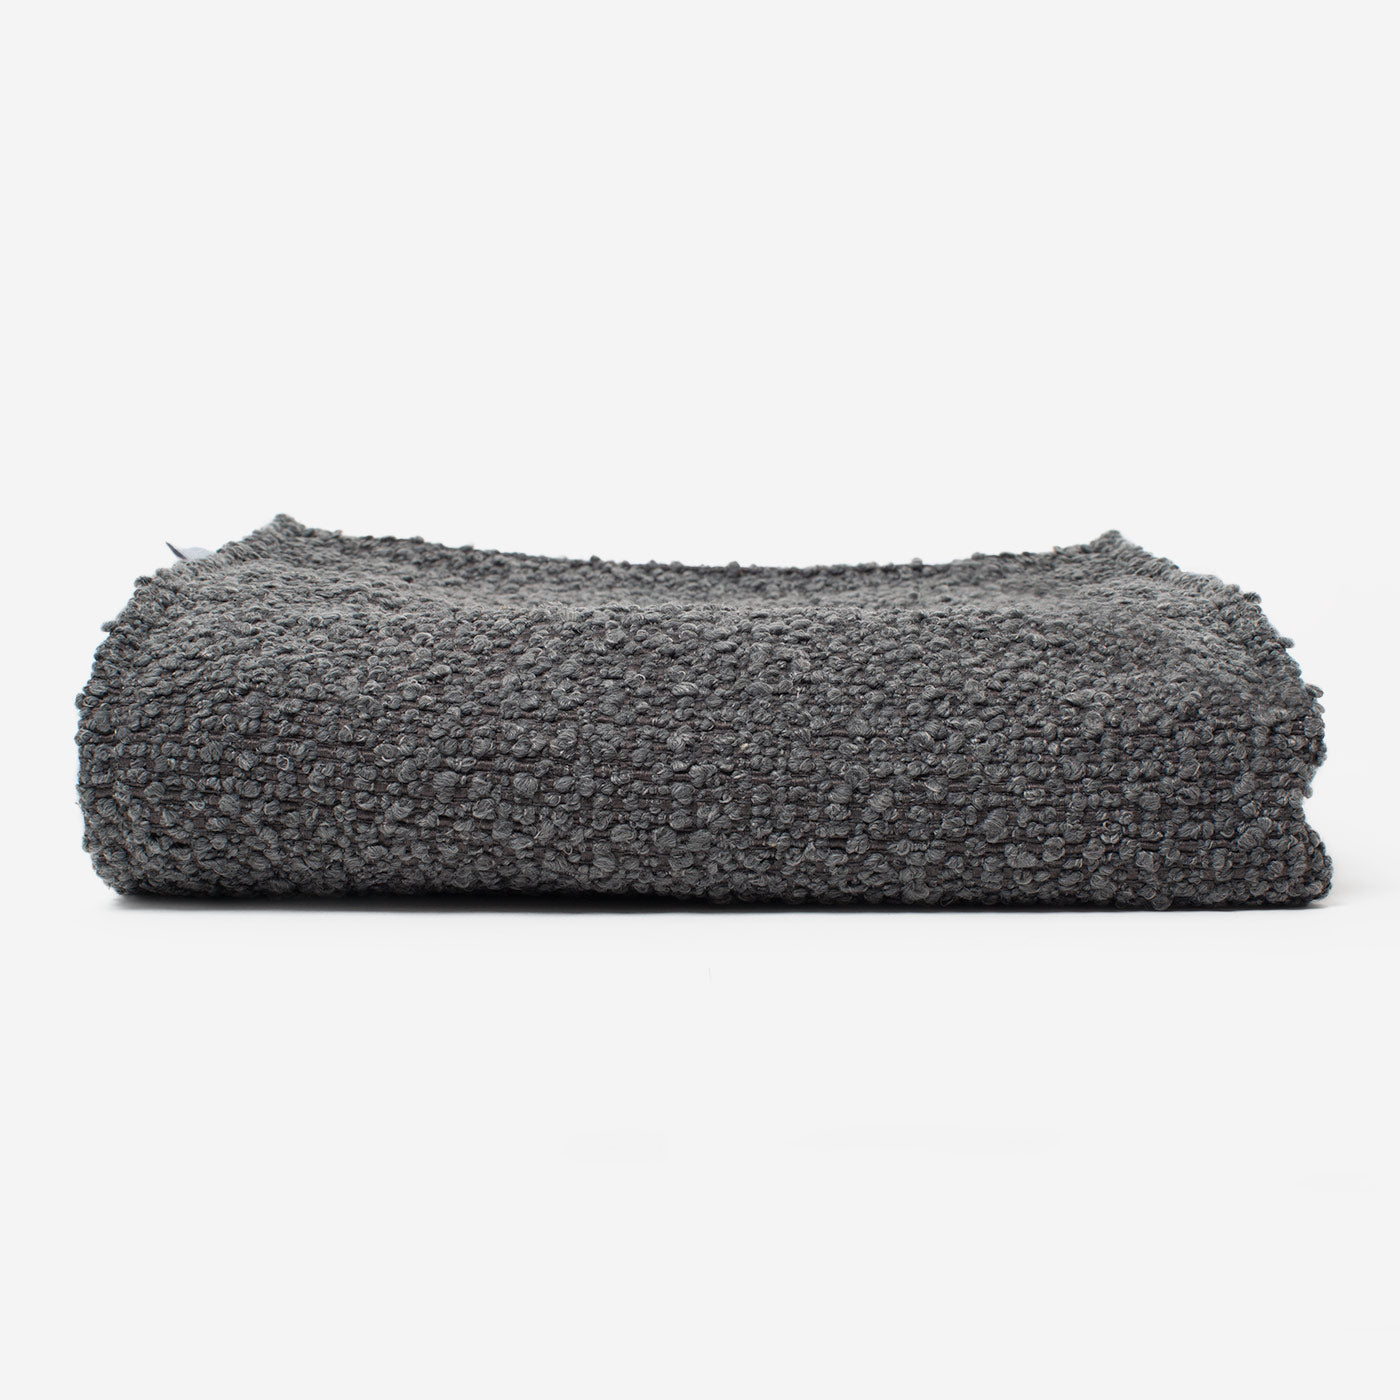 [color:Granite Boucle] Super Soft Sherpa & Teddy Fleece Lining, Our Luxury Cat & Kitten Blanket In Stunning Boucle I The Perfect Cat Bed Accessory! Available Now at Lords & Labradors US